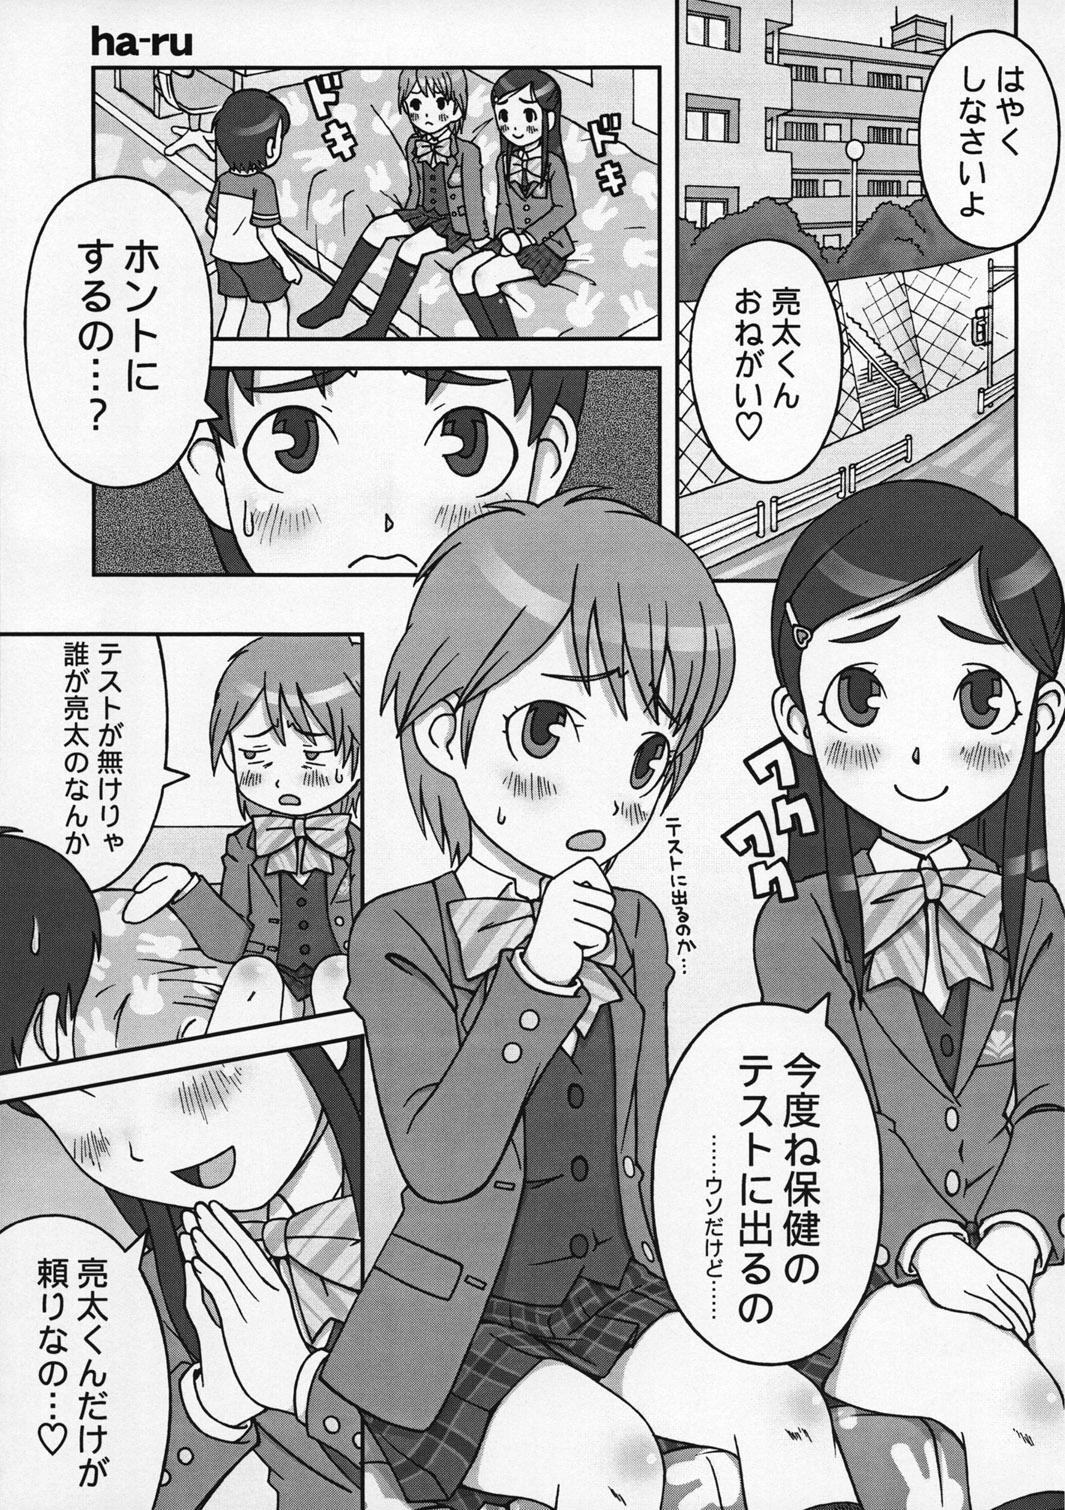 Cam Sex choco marble - Pretty cure Chubby - Page 4